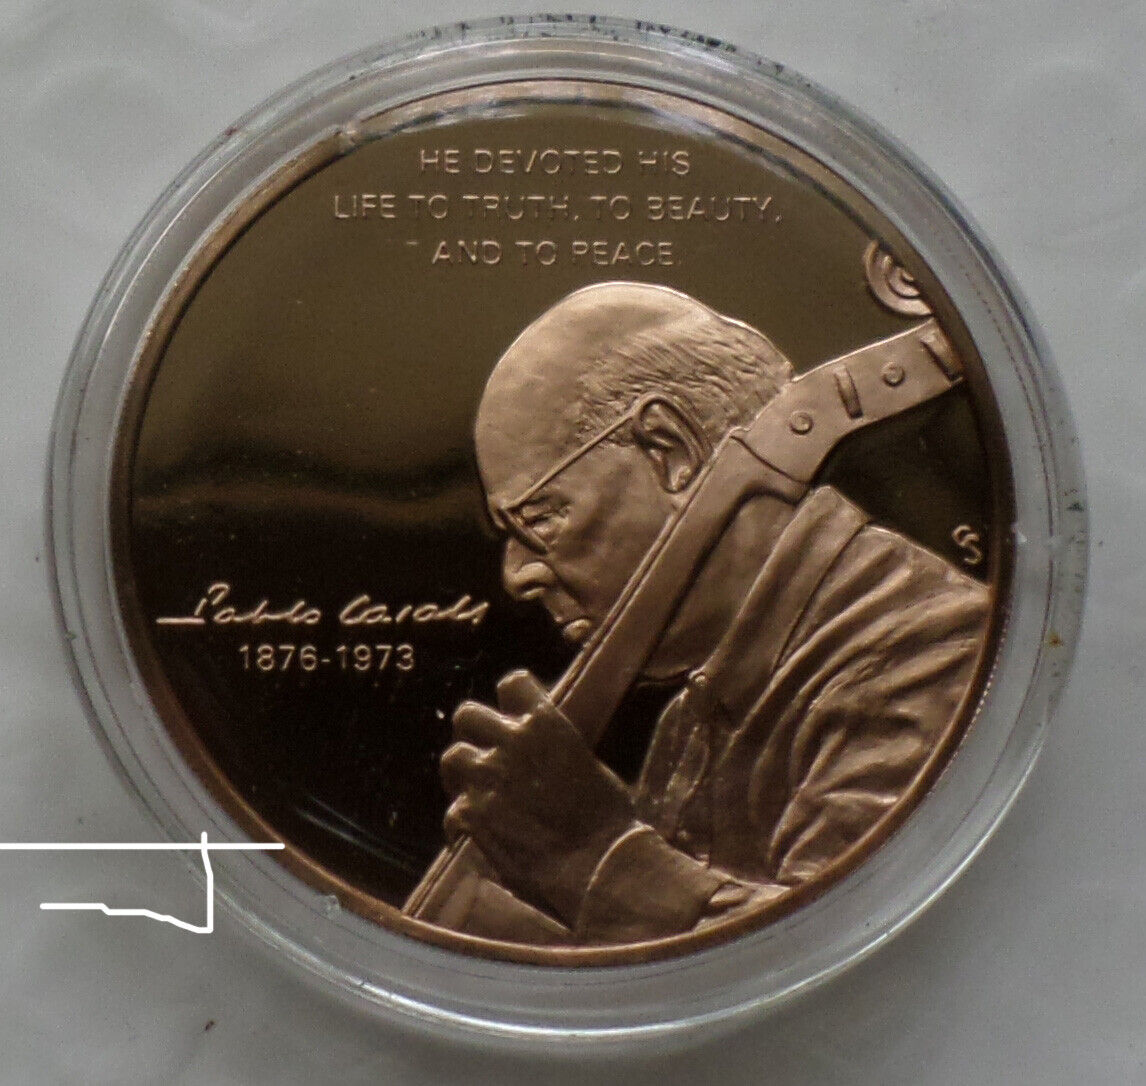  Pablo Casals, Cello Player Conductor From Catalonia Beautiful Bronze Medal